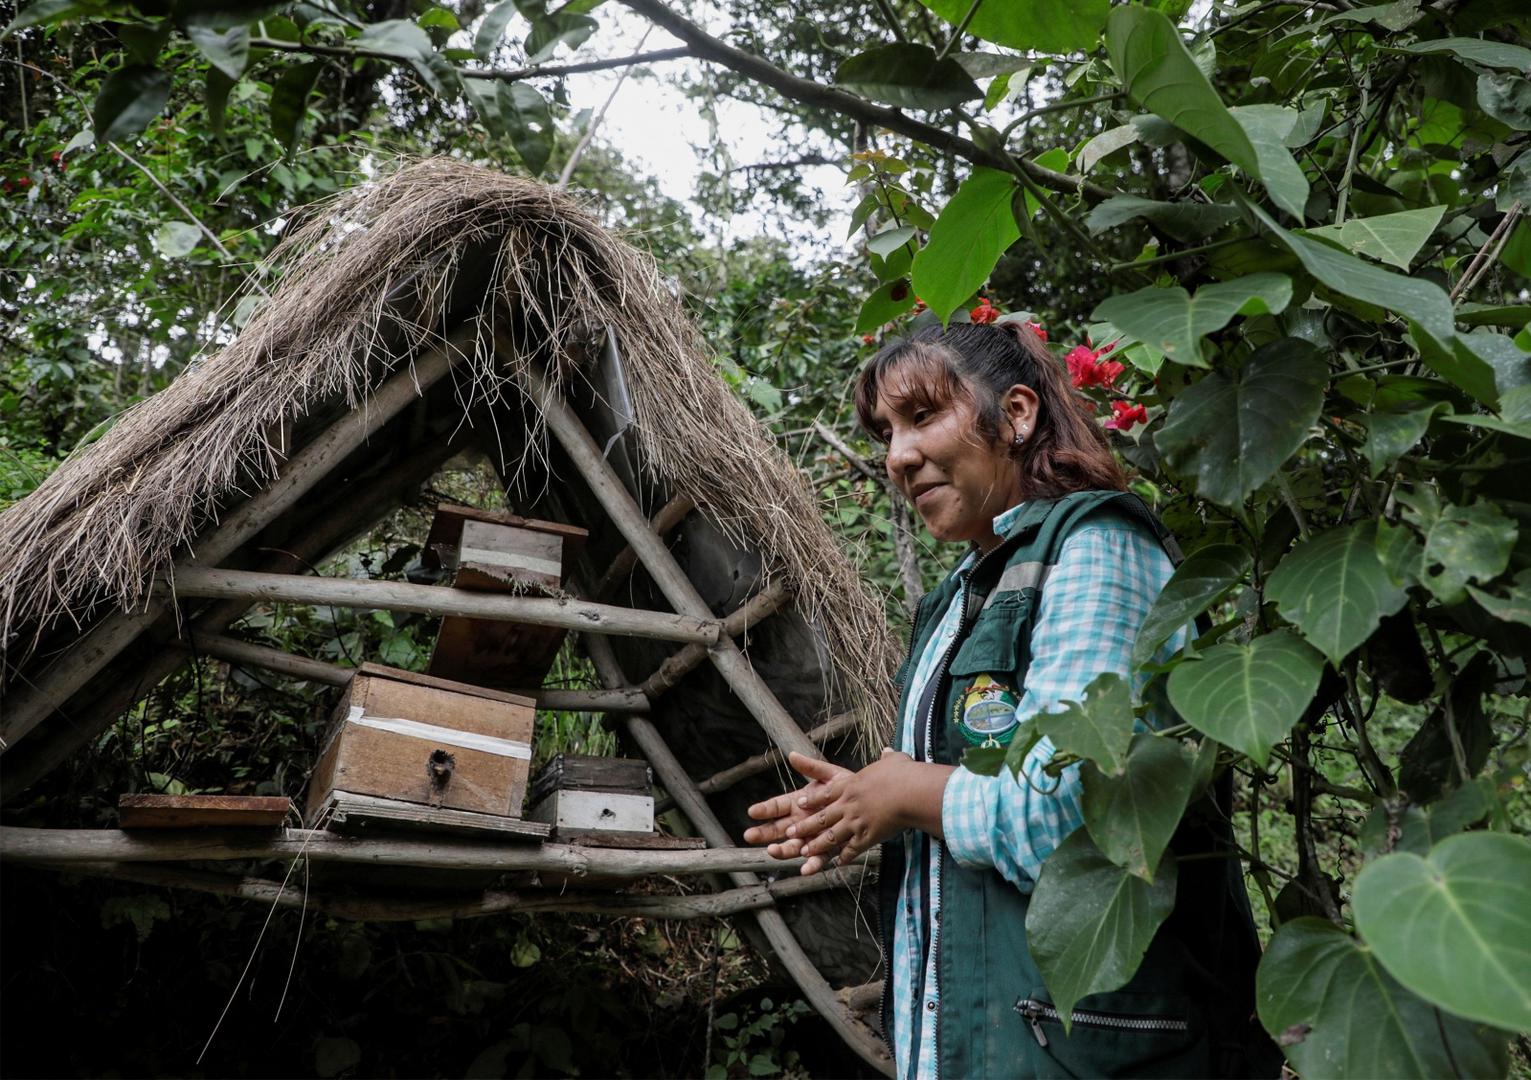 Cynthia Callizaya stands next to the honeycombs of native bees at the bee sanctuary Las Orquideas Ecoparque in Cotapata, Yungas Cynthia Callizaya stands next to the honeycombs of native bees at the bee sanctuary Las Orquideas Ecoparque in Cotapata, Yungas, Bolivia, January 13, 2021. Picture taken January 13, 2021. REUTERS/David Mercado DAVID MERCADO